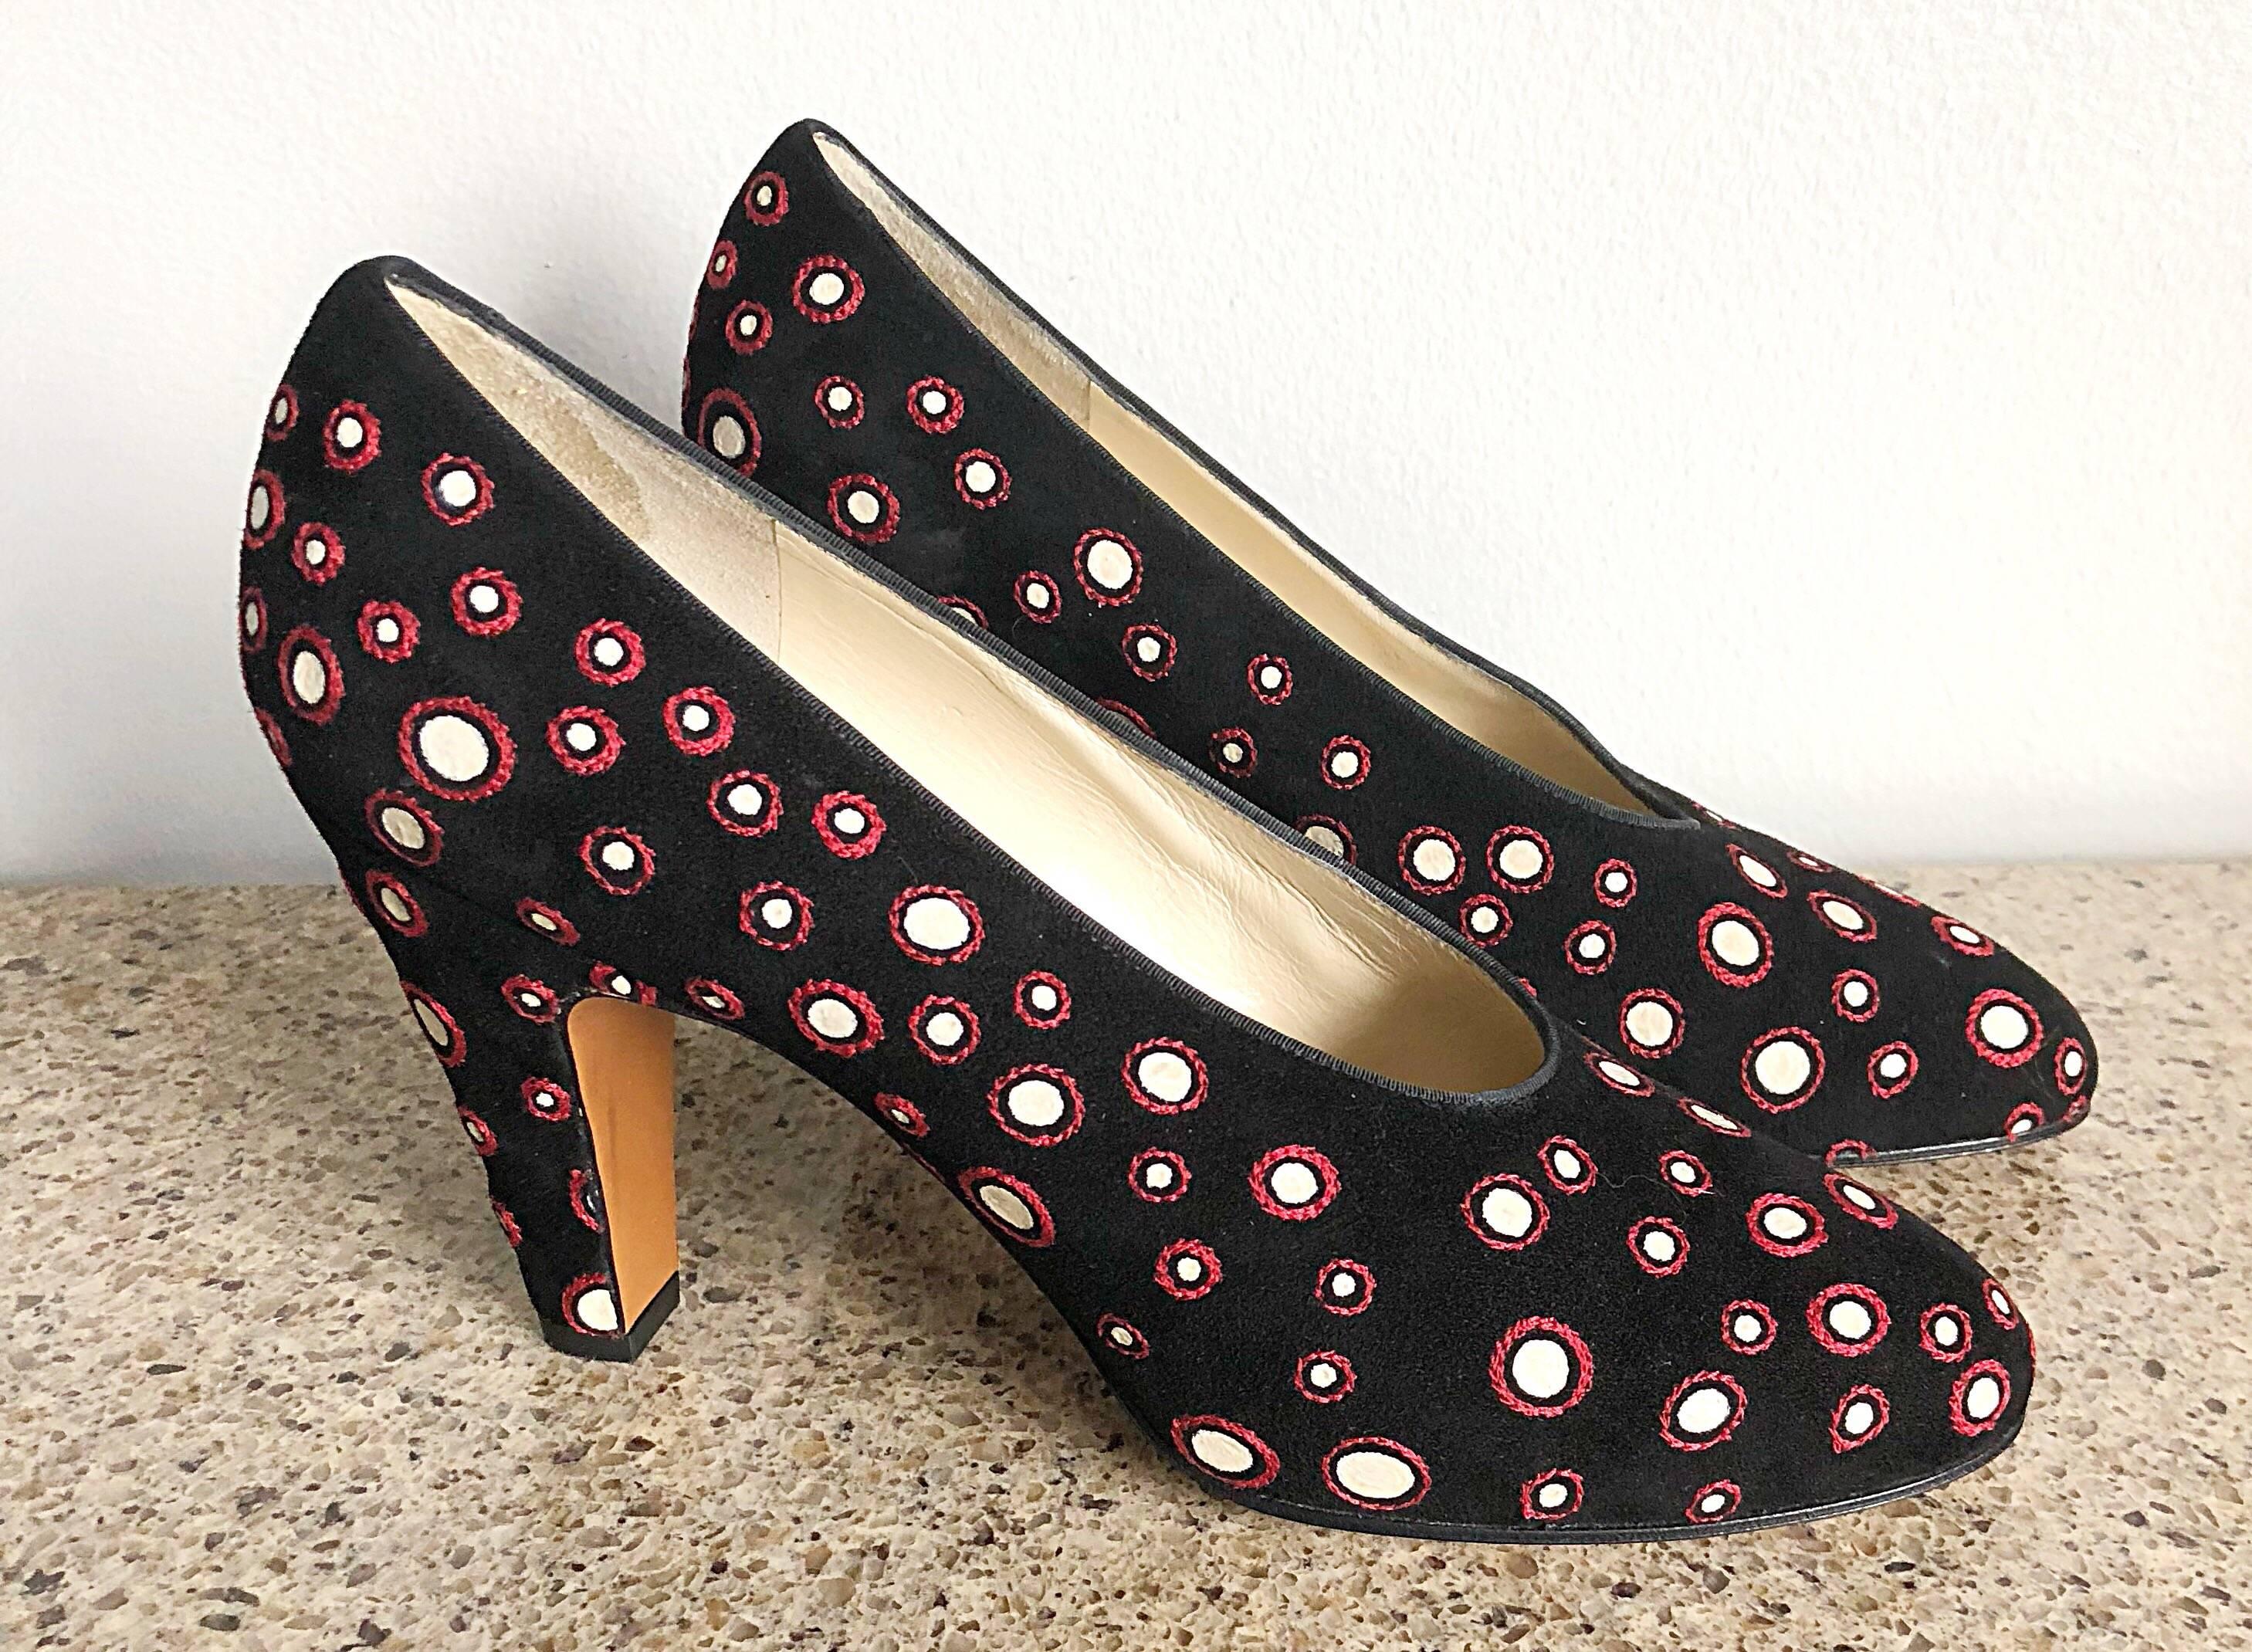 Brand new SALVATORE FERRAGAMO archive limited edition 30s style high heel pumps! Only 500 of these rare beauties were produced, and this pair is marked #30 of 500. Retailed for $1,290. Features a black suede leather, with red stitching outlining